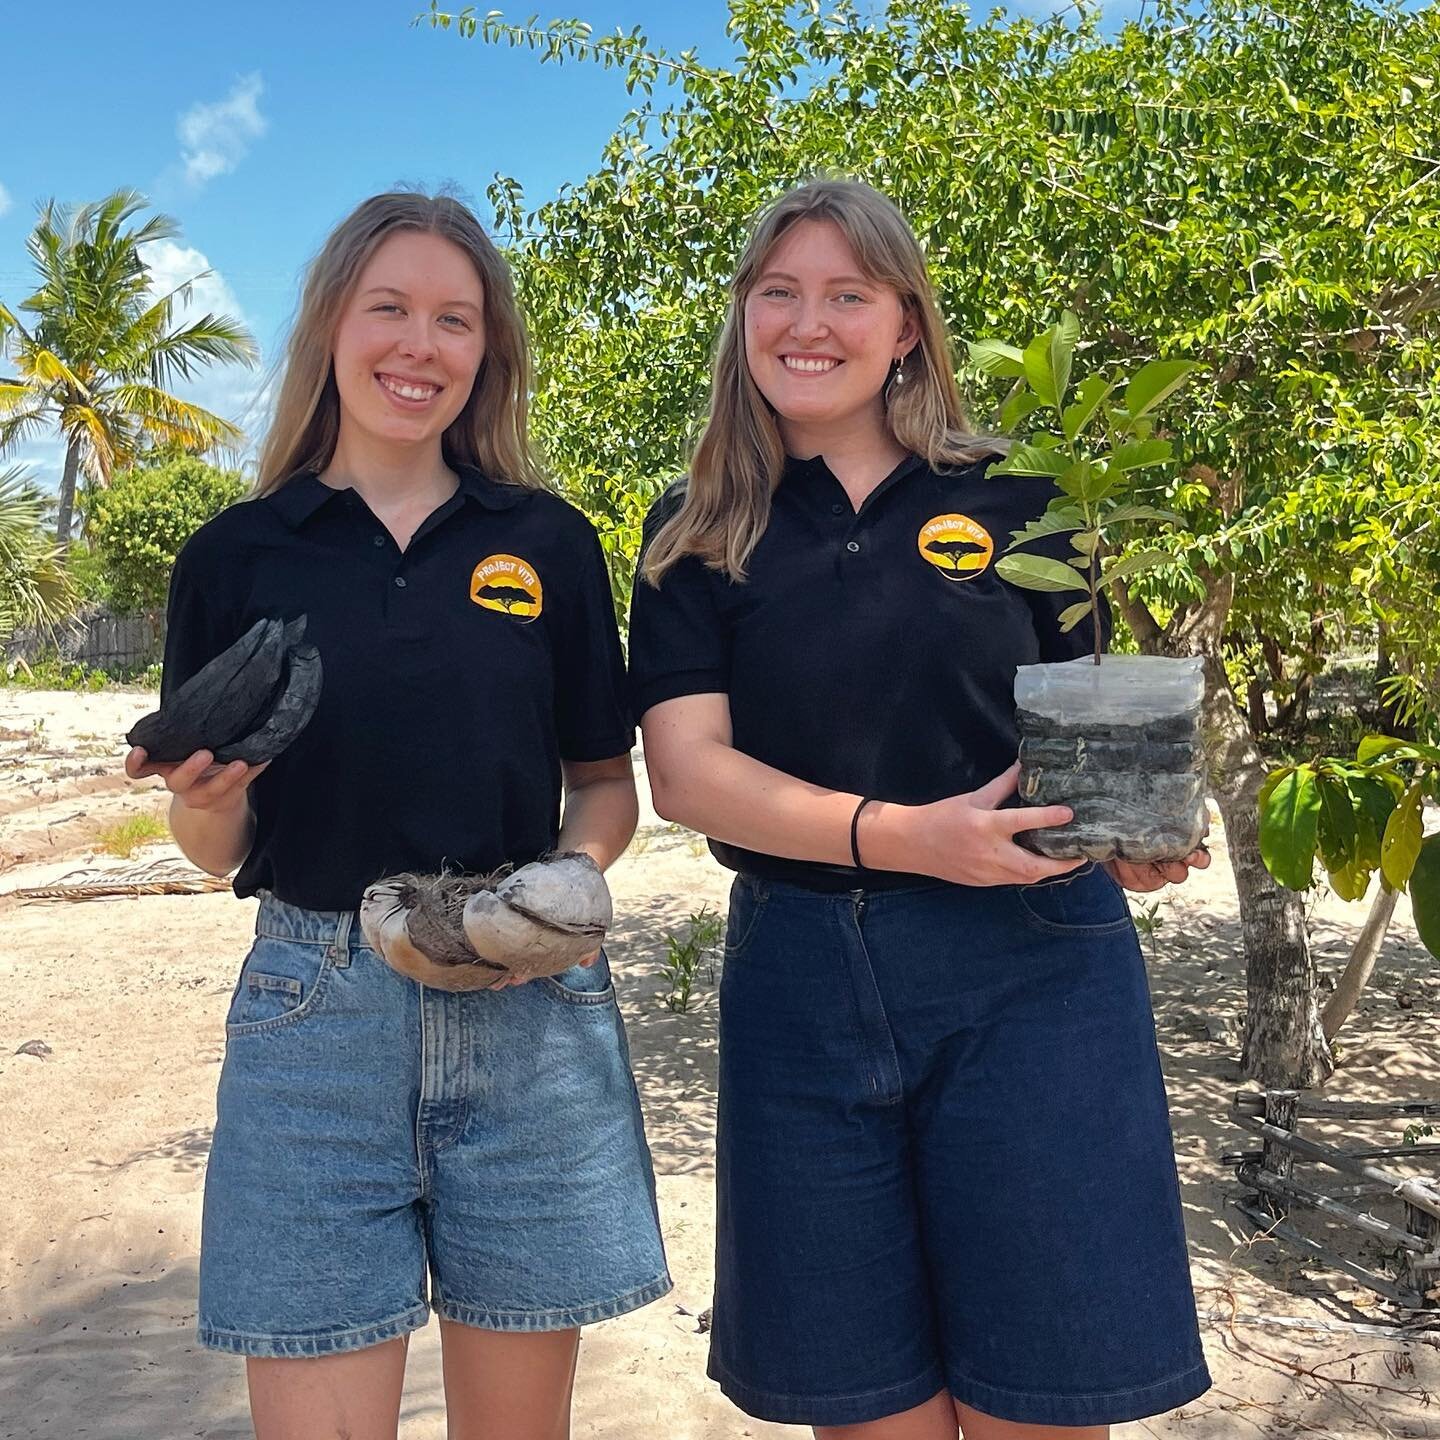 @elinlampi &amp; @ellenedhammer are Mechanical engineering students from @lundsuniversitet, writing their master thesis in energy technology. 
⚡️
The purpose of their research is to see how small scale agriculture in Linga Linga can be improved  by u